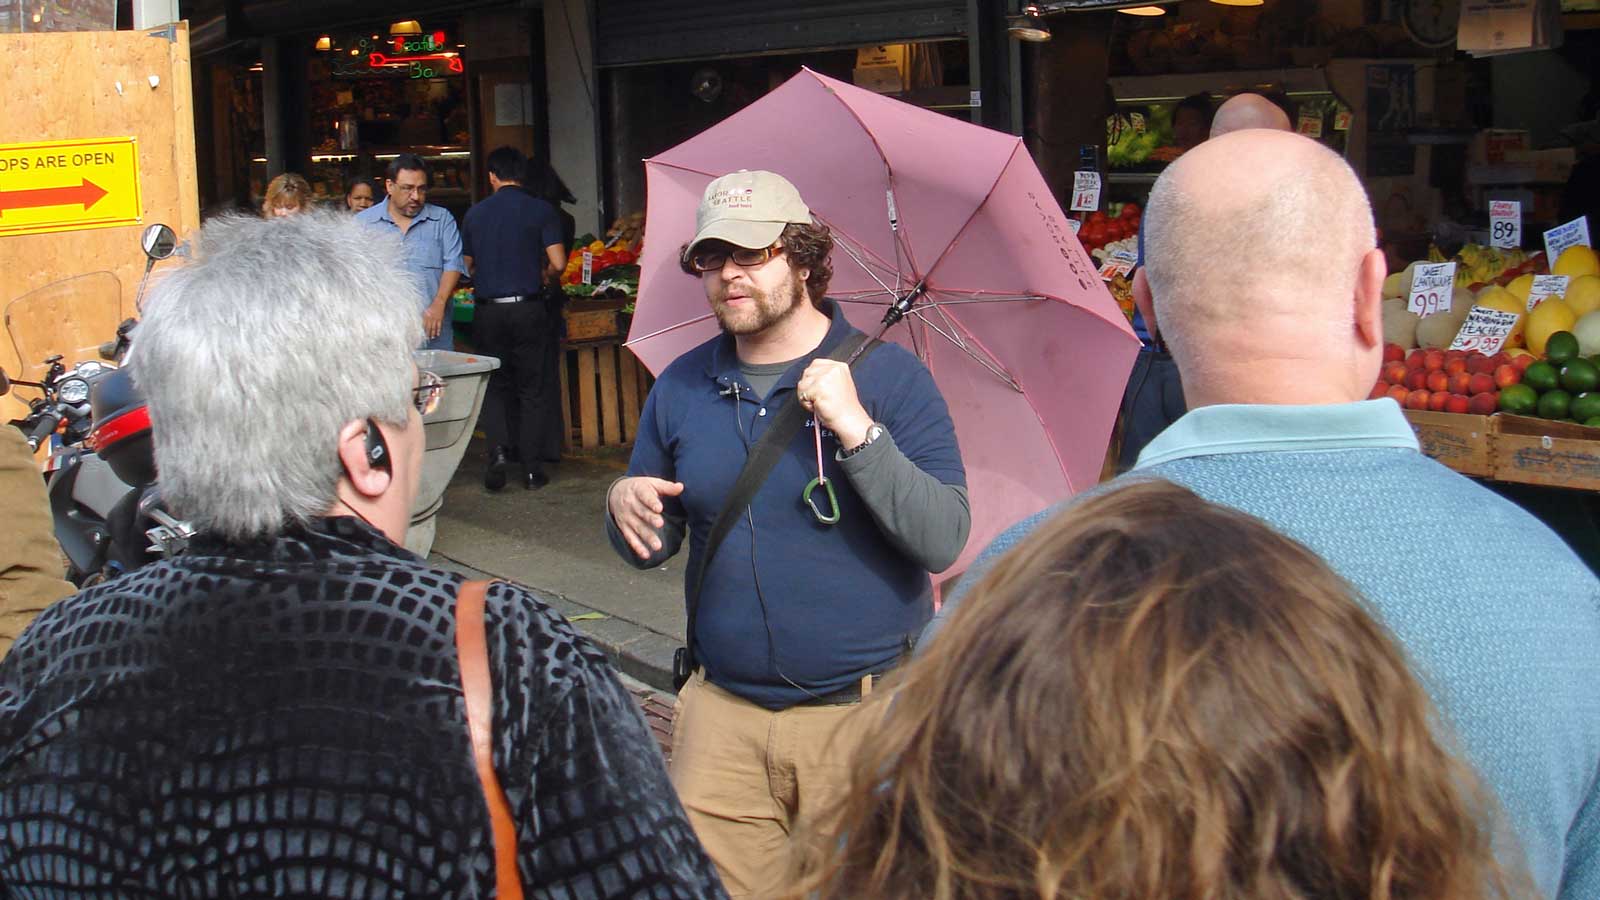 Our tour guide Nick holding his pink umbrella